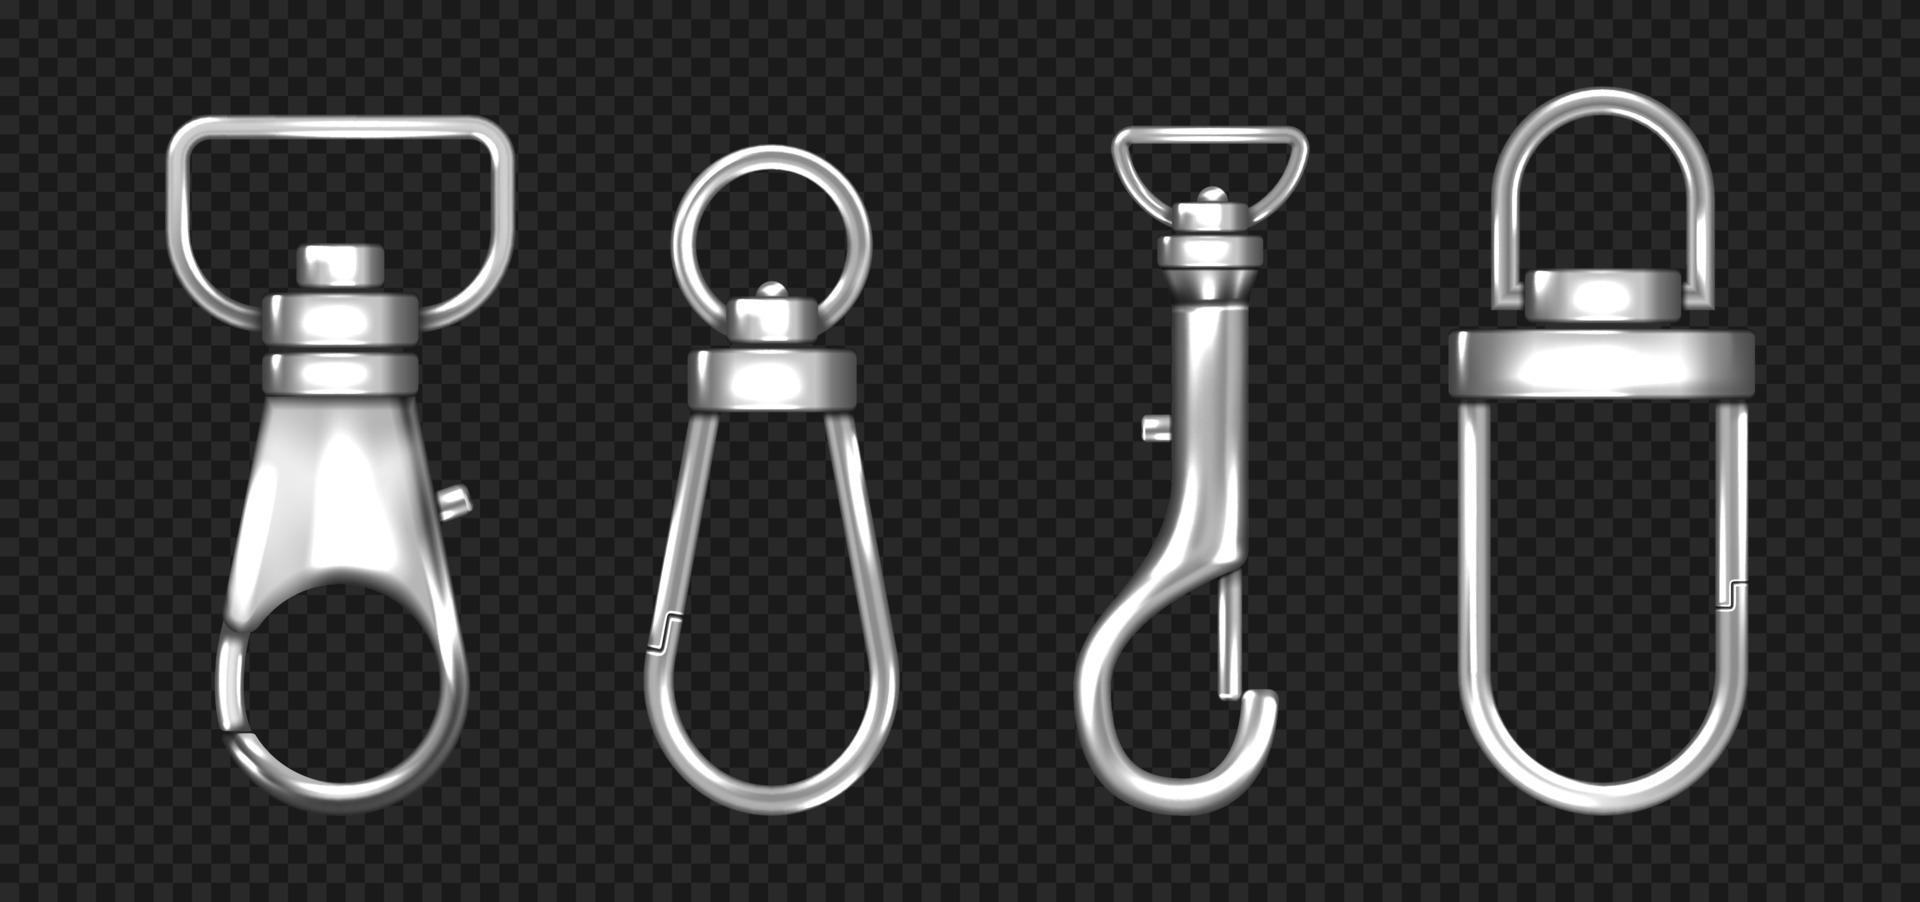 Realistic set of metal carabiners, lobster clasps vector